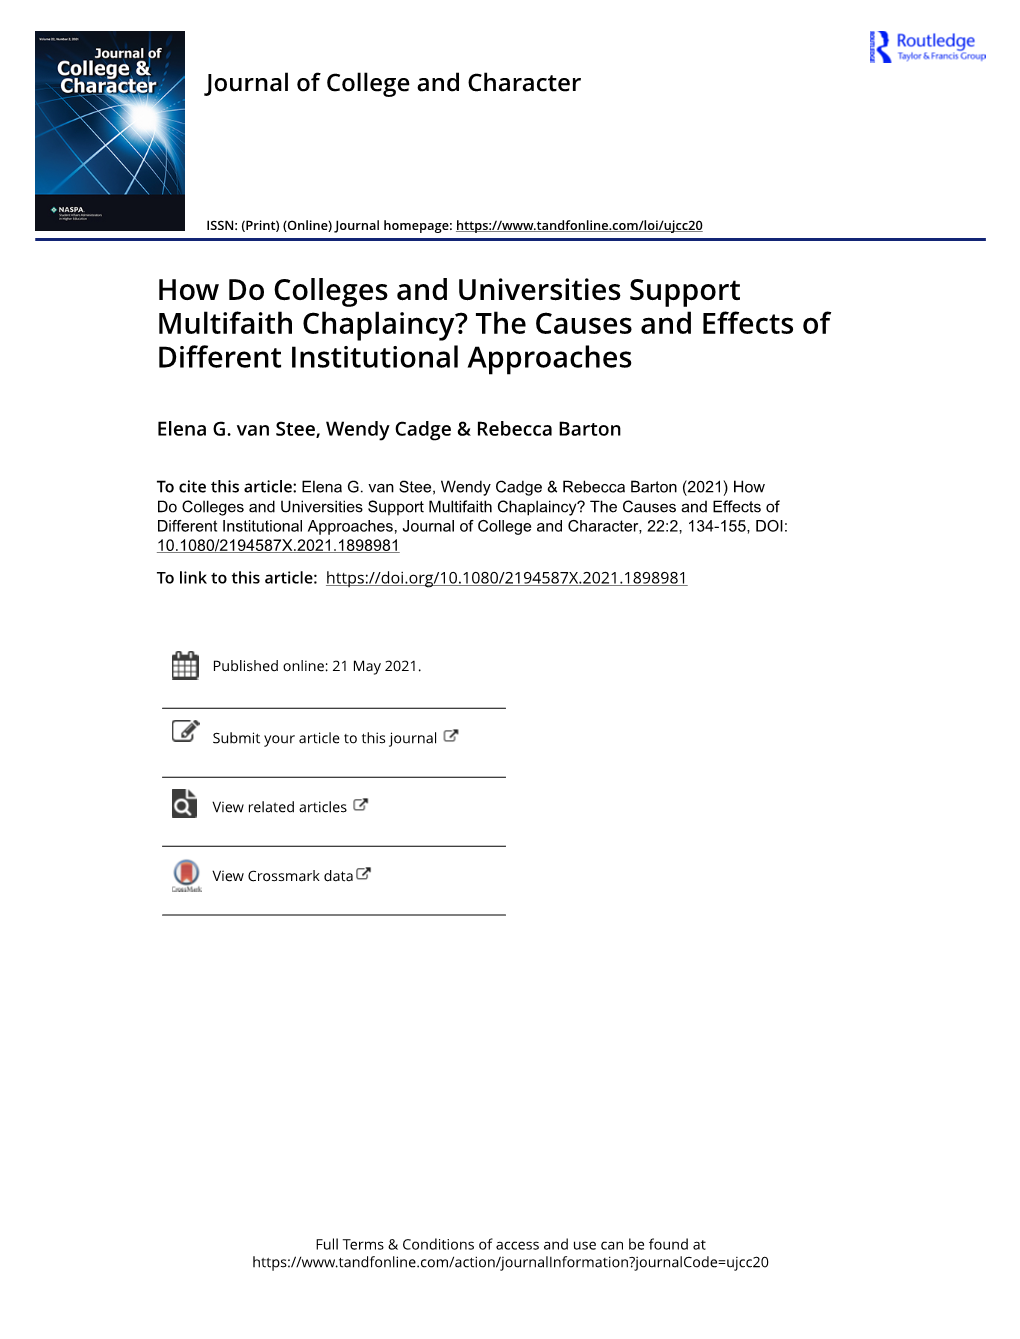 How Do Colleges and Universities Support Multifaith Chaplaincy? the Causes and Effects of Different Institutional Approaches